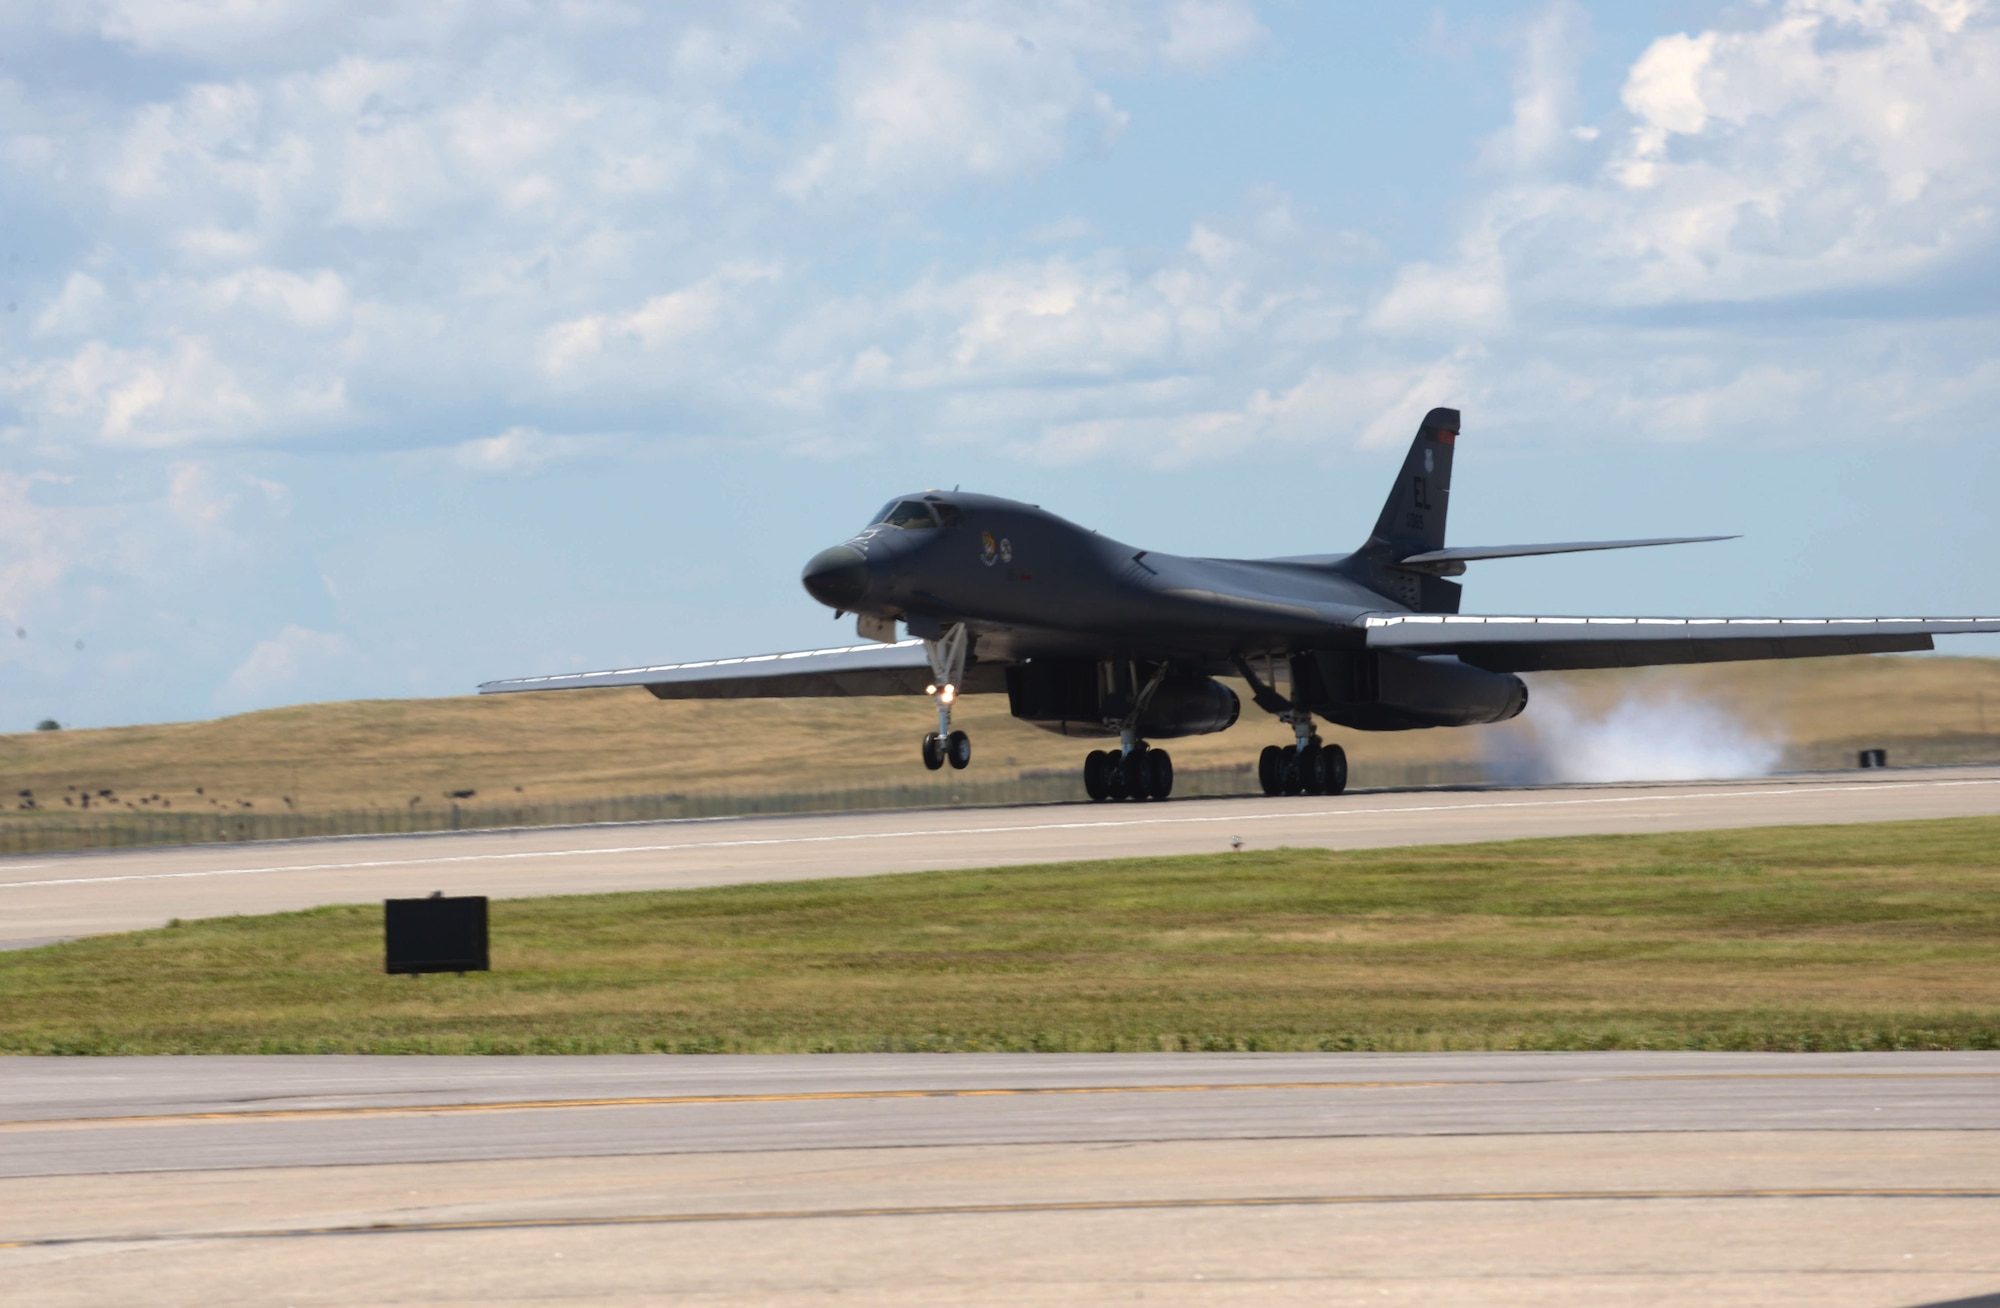 A B-1 bomber touches down at Ellsworth Air Force Base, S.D., July 25, 2016, after concluding an incentive flight for Chief Master Sgt. Sonia Lee, the command chief of the 28th Bomb Wing. The flight was to familiarize Lee with all that goes into flying the B-1, who’s involved, and to experience its capabilities firsthand. (U.S. Air Force photo by Airman Donald Knechtel) 